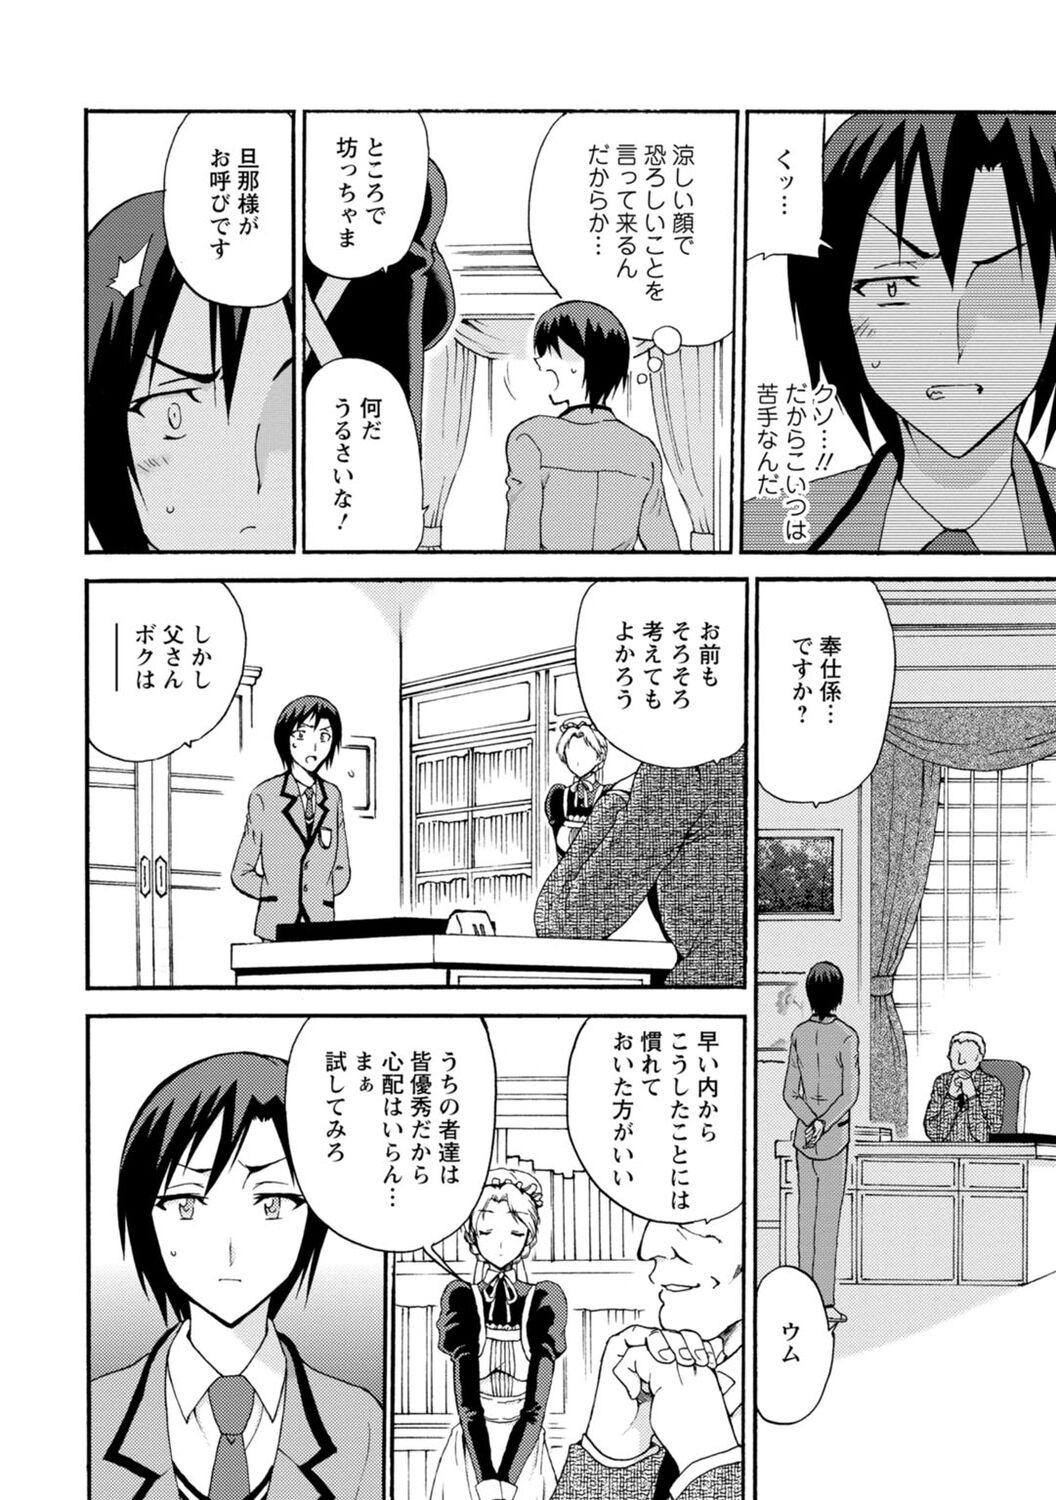 Family Roleplay 僕専属メイドが言うことを聞かない～夜のご奉仕で主従逆転!?～【増量版】 Amador - Page 6